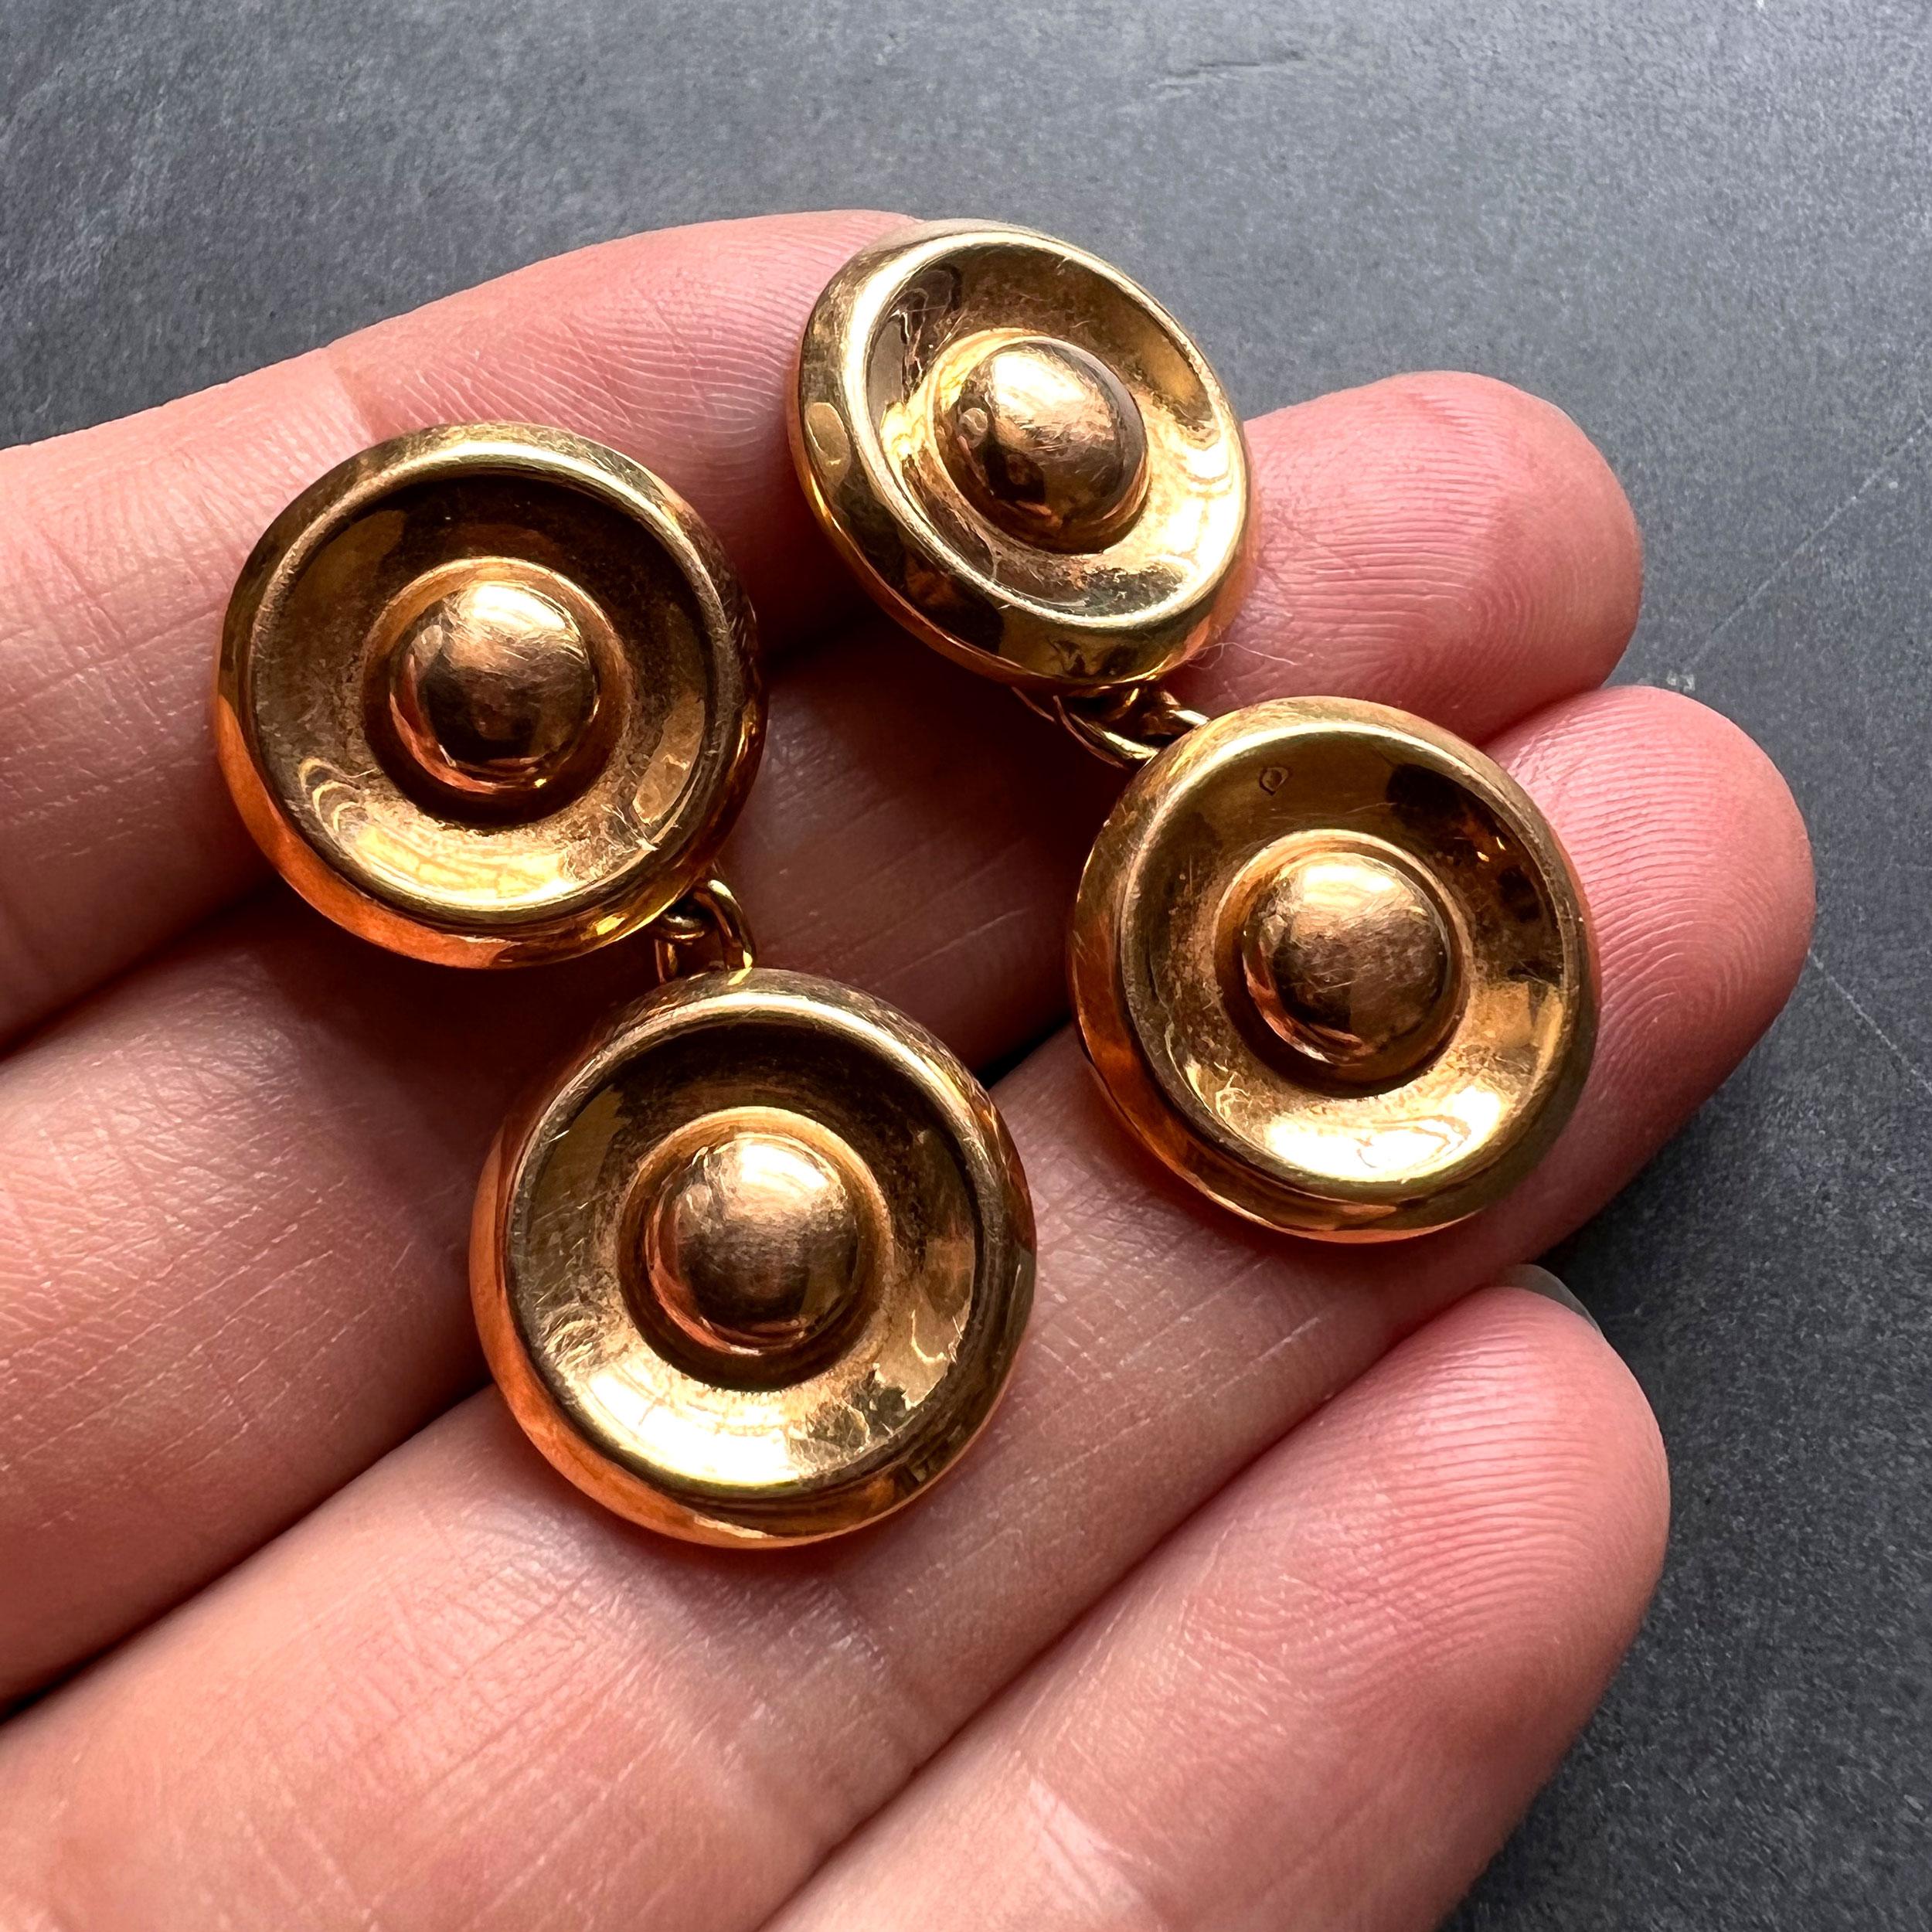 A pair of French 18K (18 karat) yellow gold cufflinks designed as a pair of gold discs. Stamped with the eagle’s head for French manufacture and 18 karat gold with unknown maker’s mark.

Dimensions: 1.5 x 1.5 x 2.8 cm 
Weight: 8.09 grams
